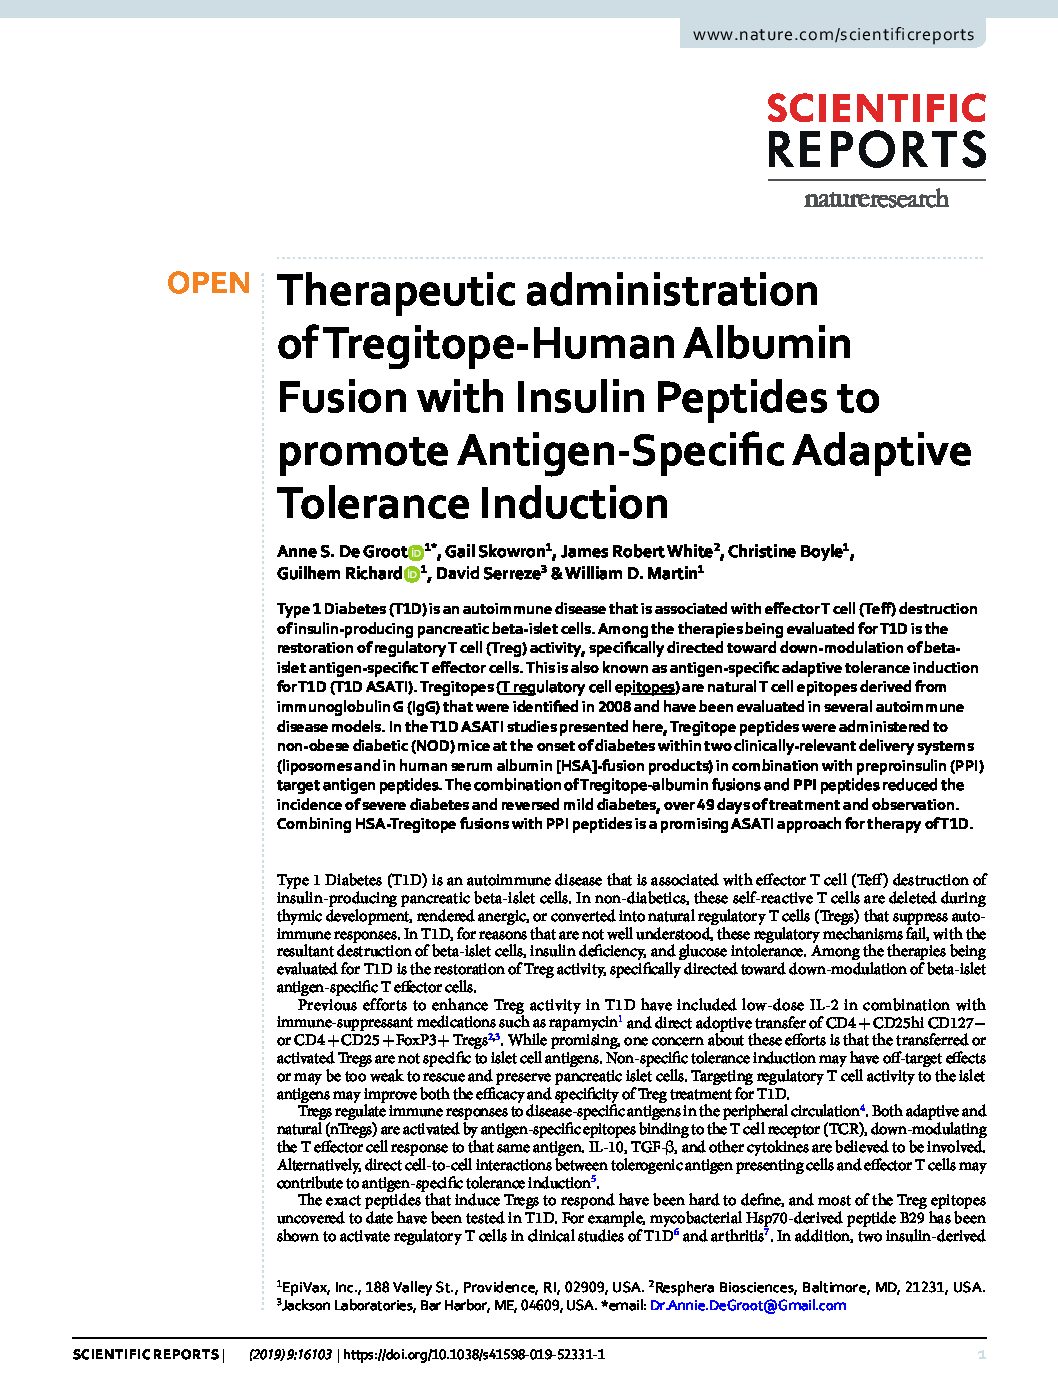 Therapeutic administration of Tregitope-Human Albumin Fusion with Insulin Peptides to promote Antigen-Specific Adaptive Tolerance Induction